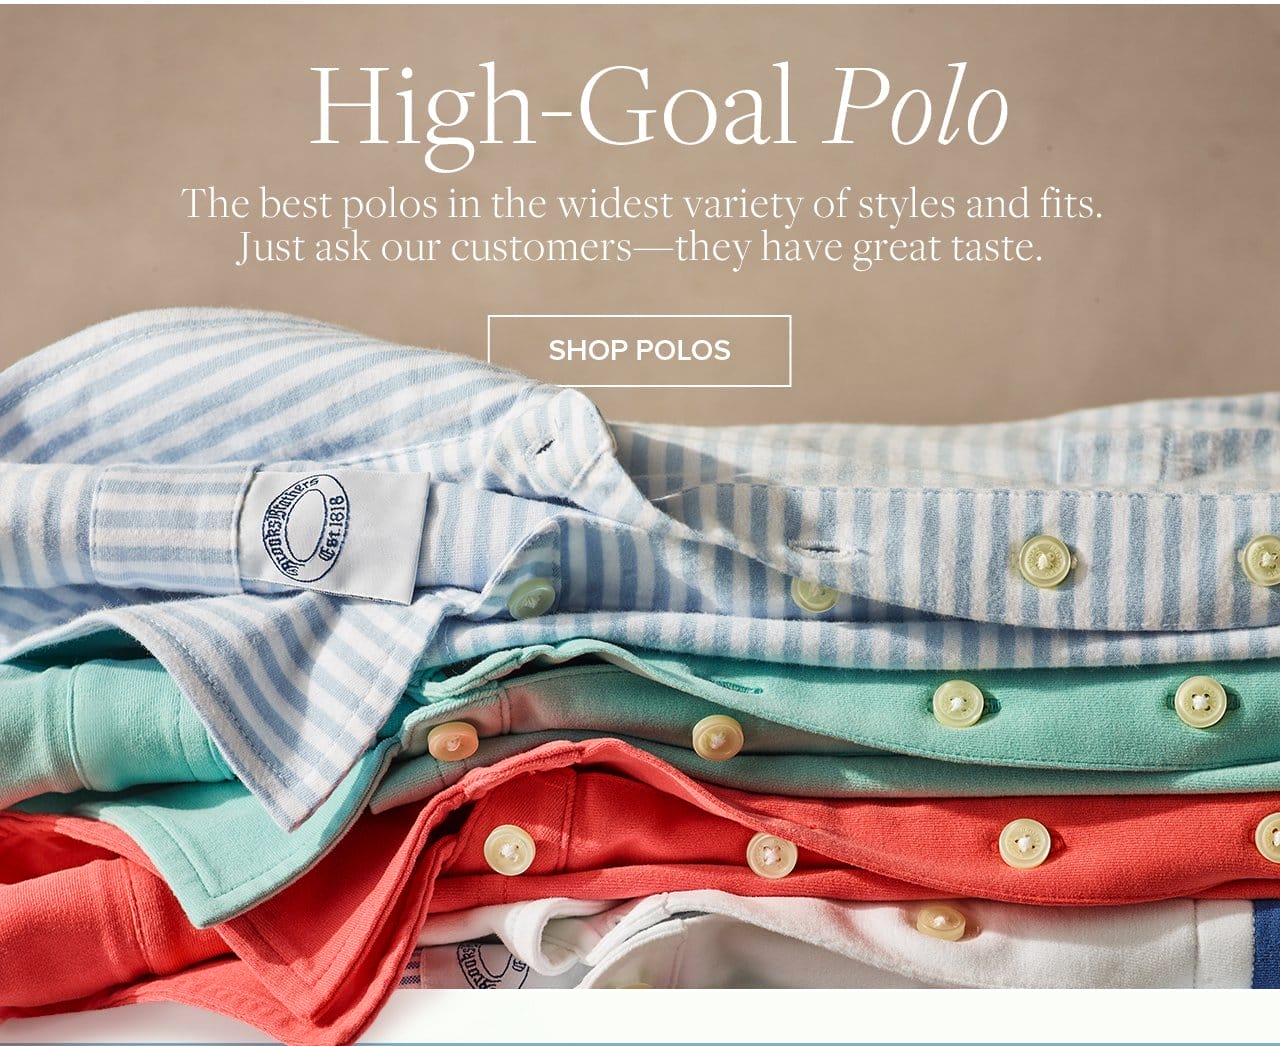 High-Goal Polo The best polos in the widest variety of styles and fits. Just ask our customers - they have great taste. Shop Polos